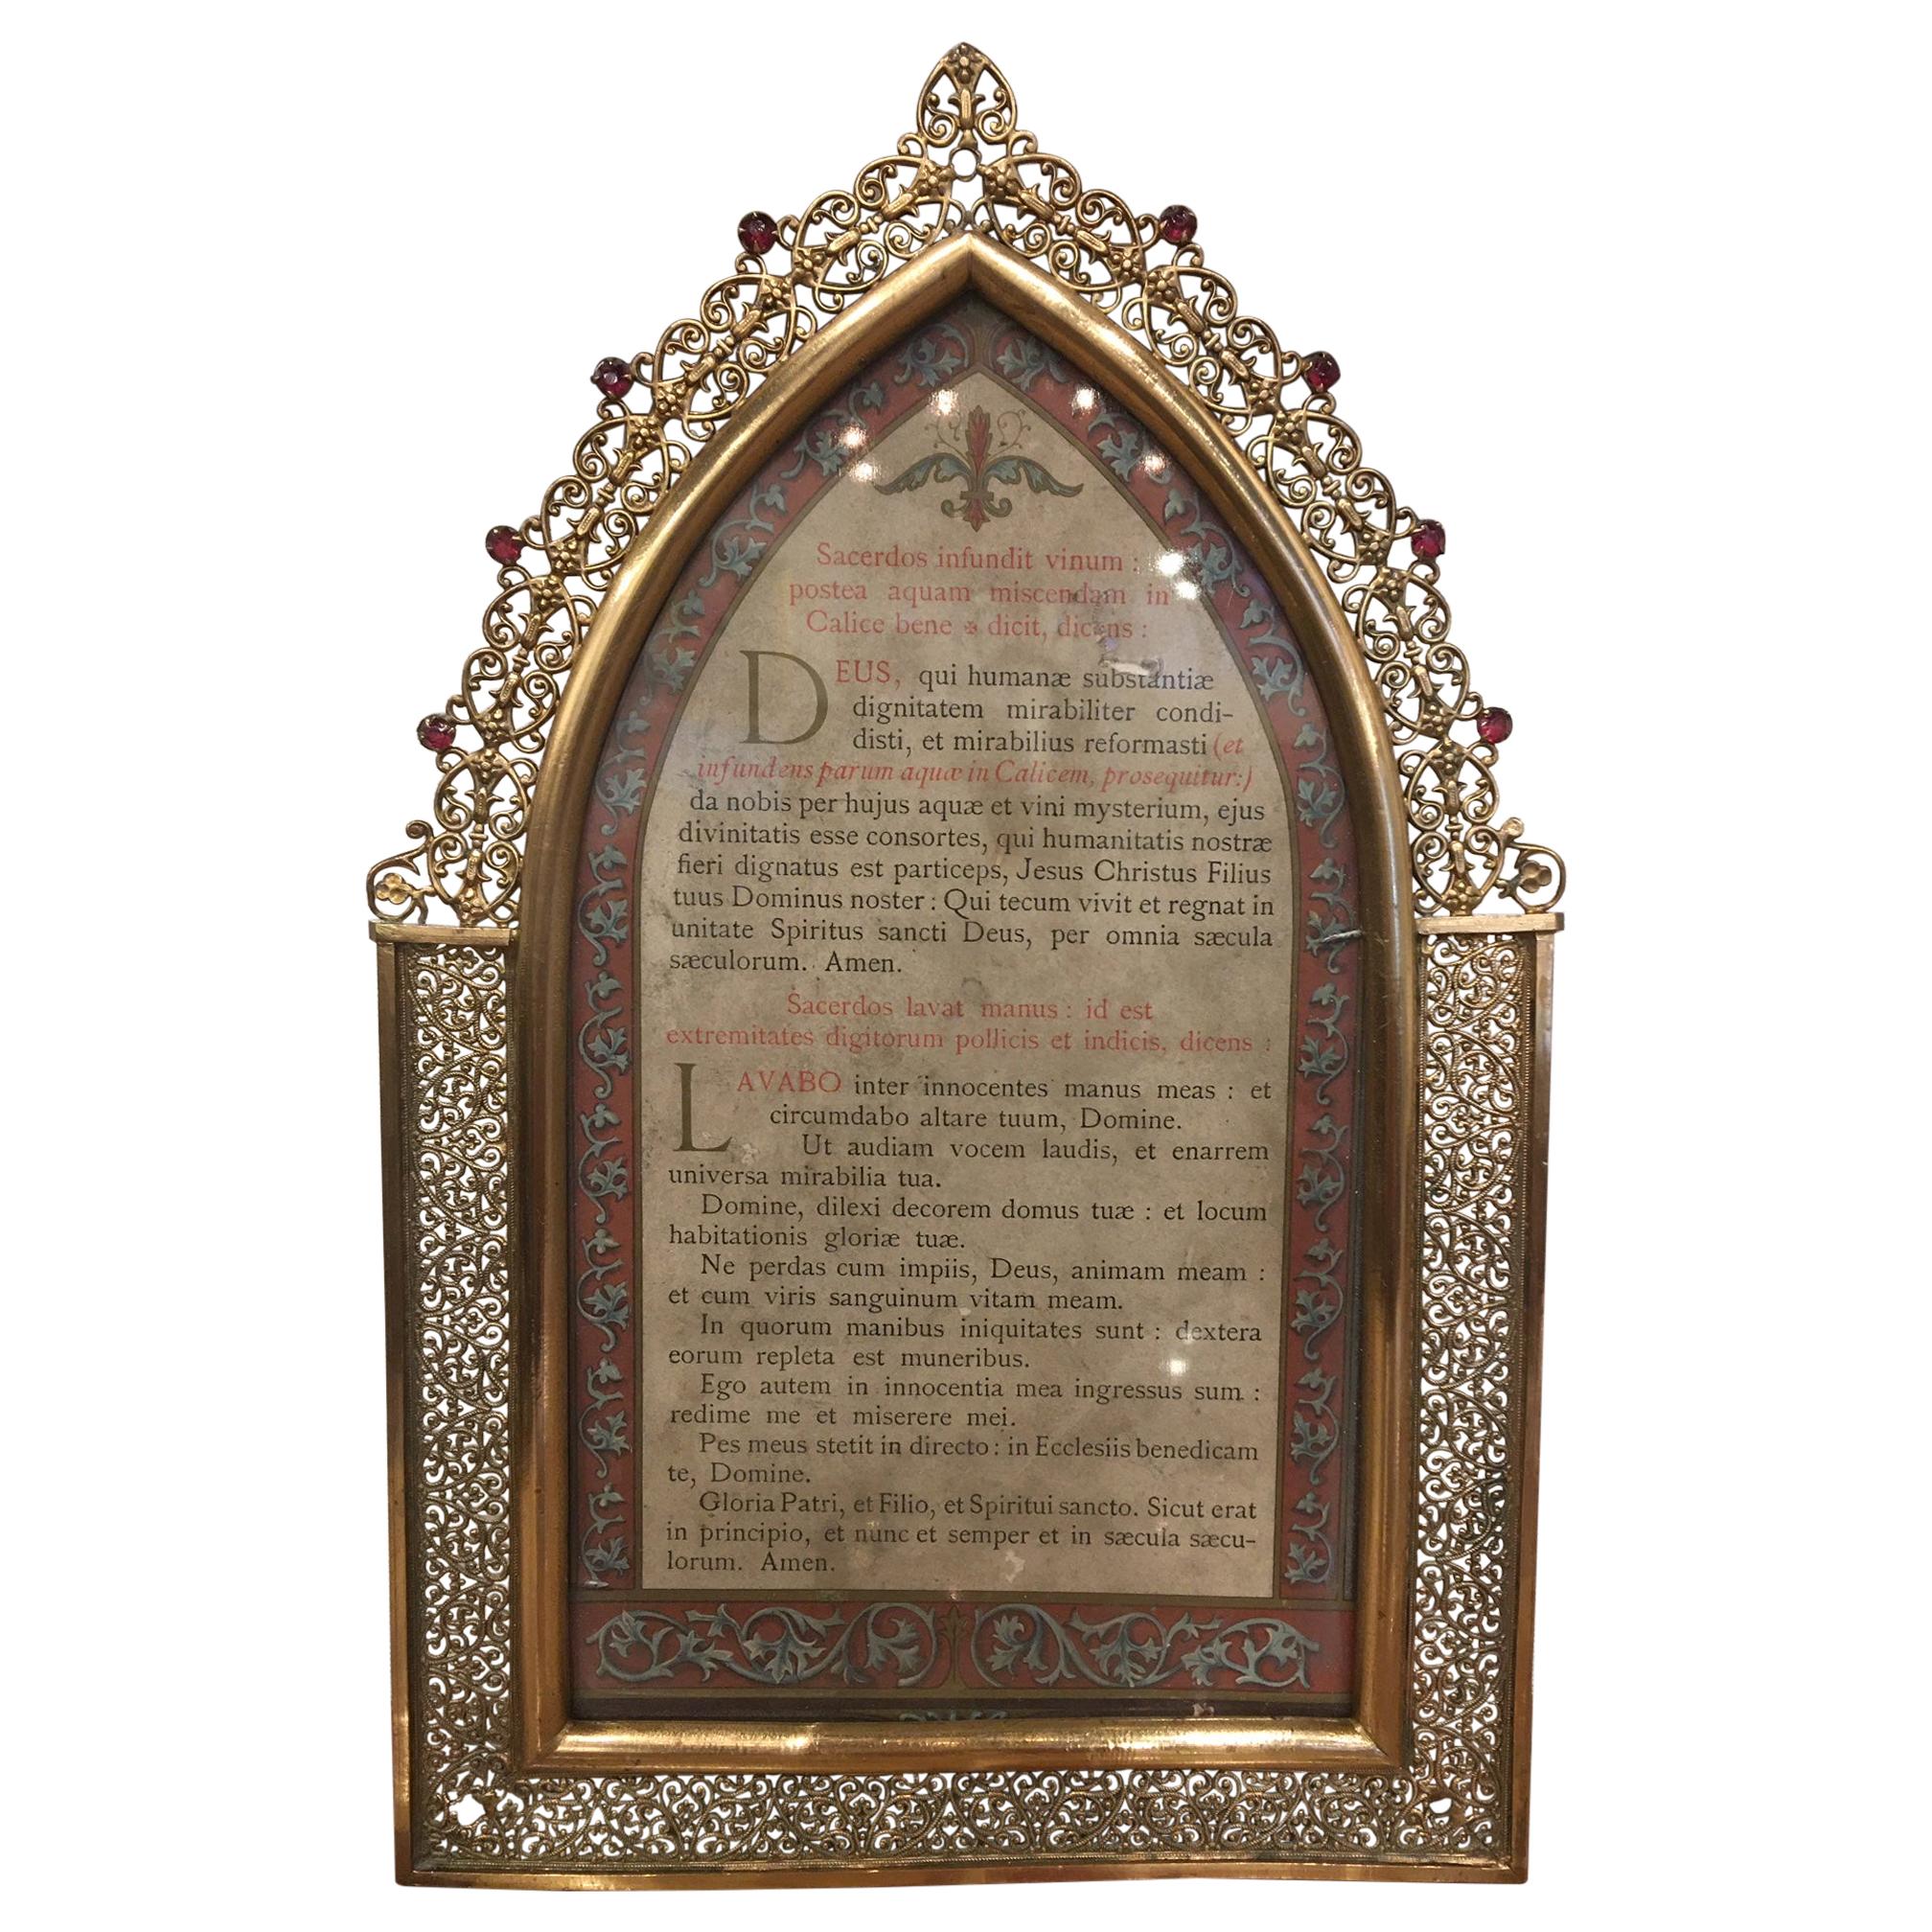 Polished Brass Picture Frame with Decorative Trim Around, 19th Century